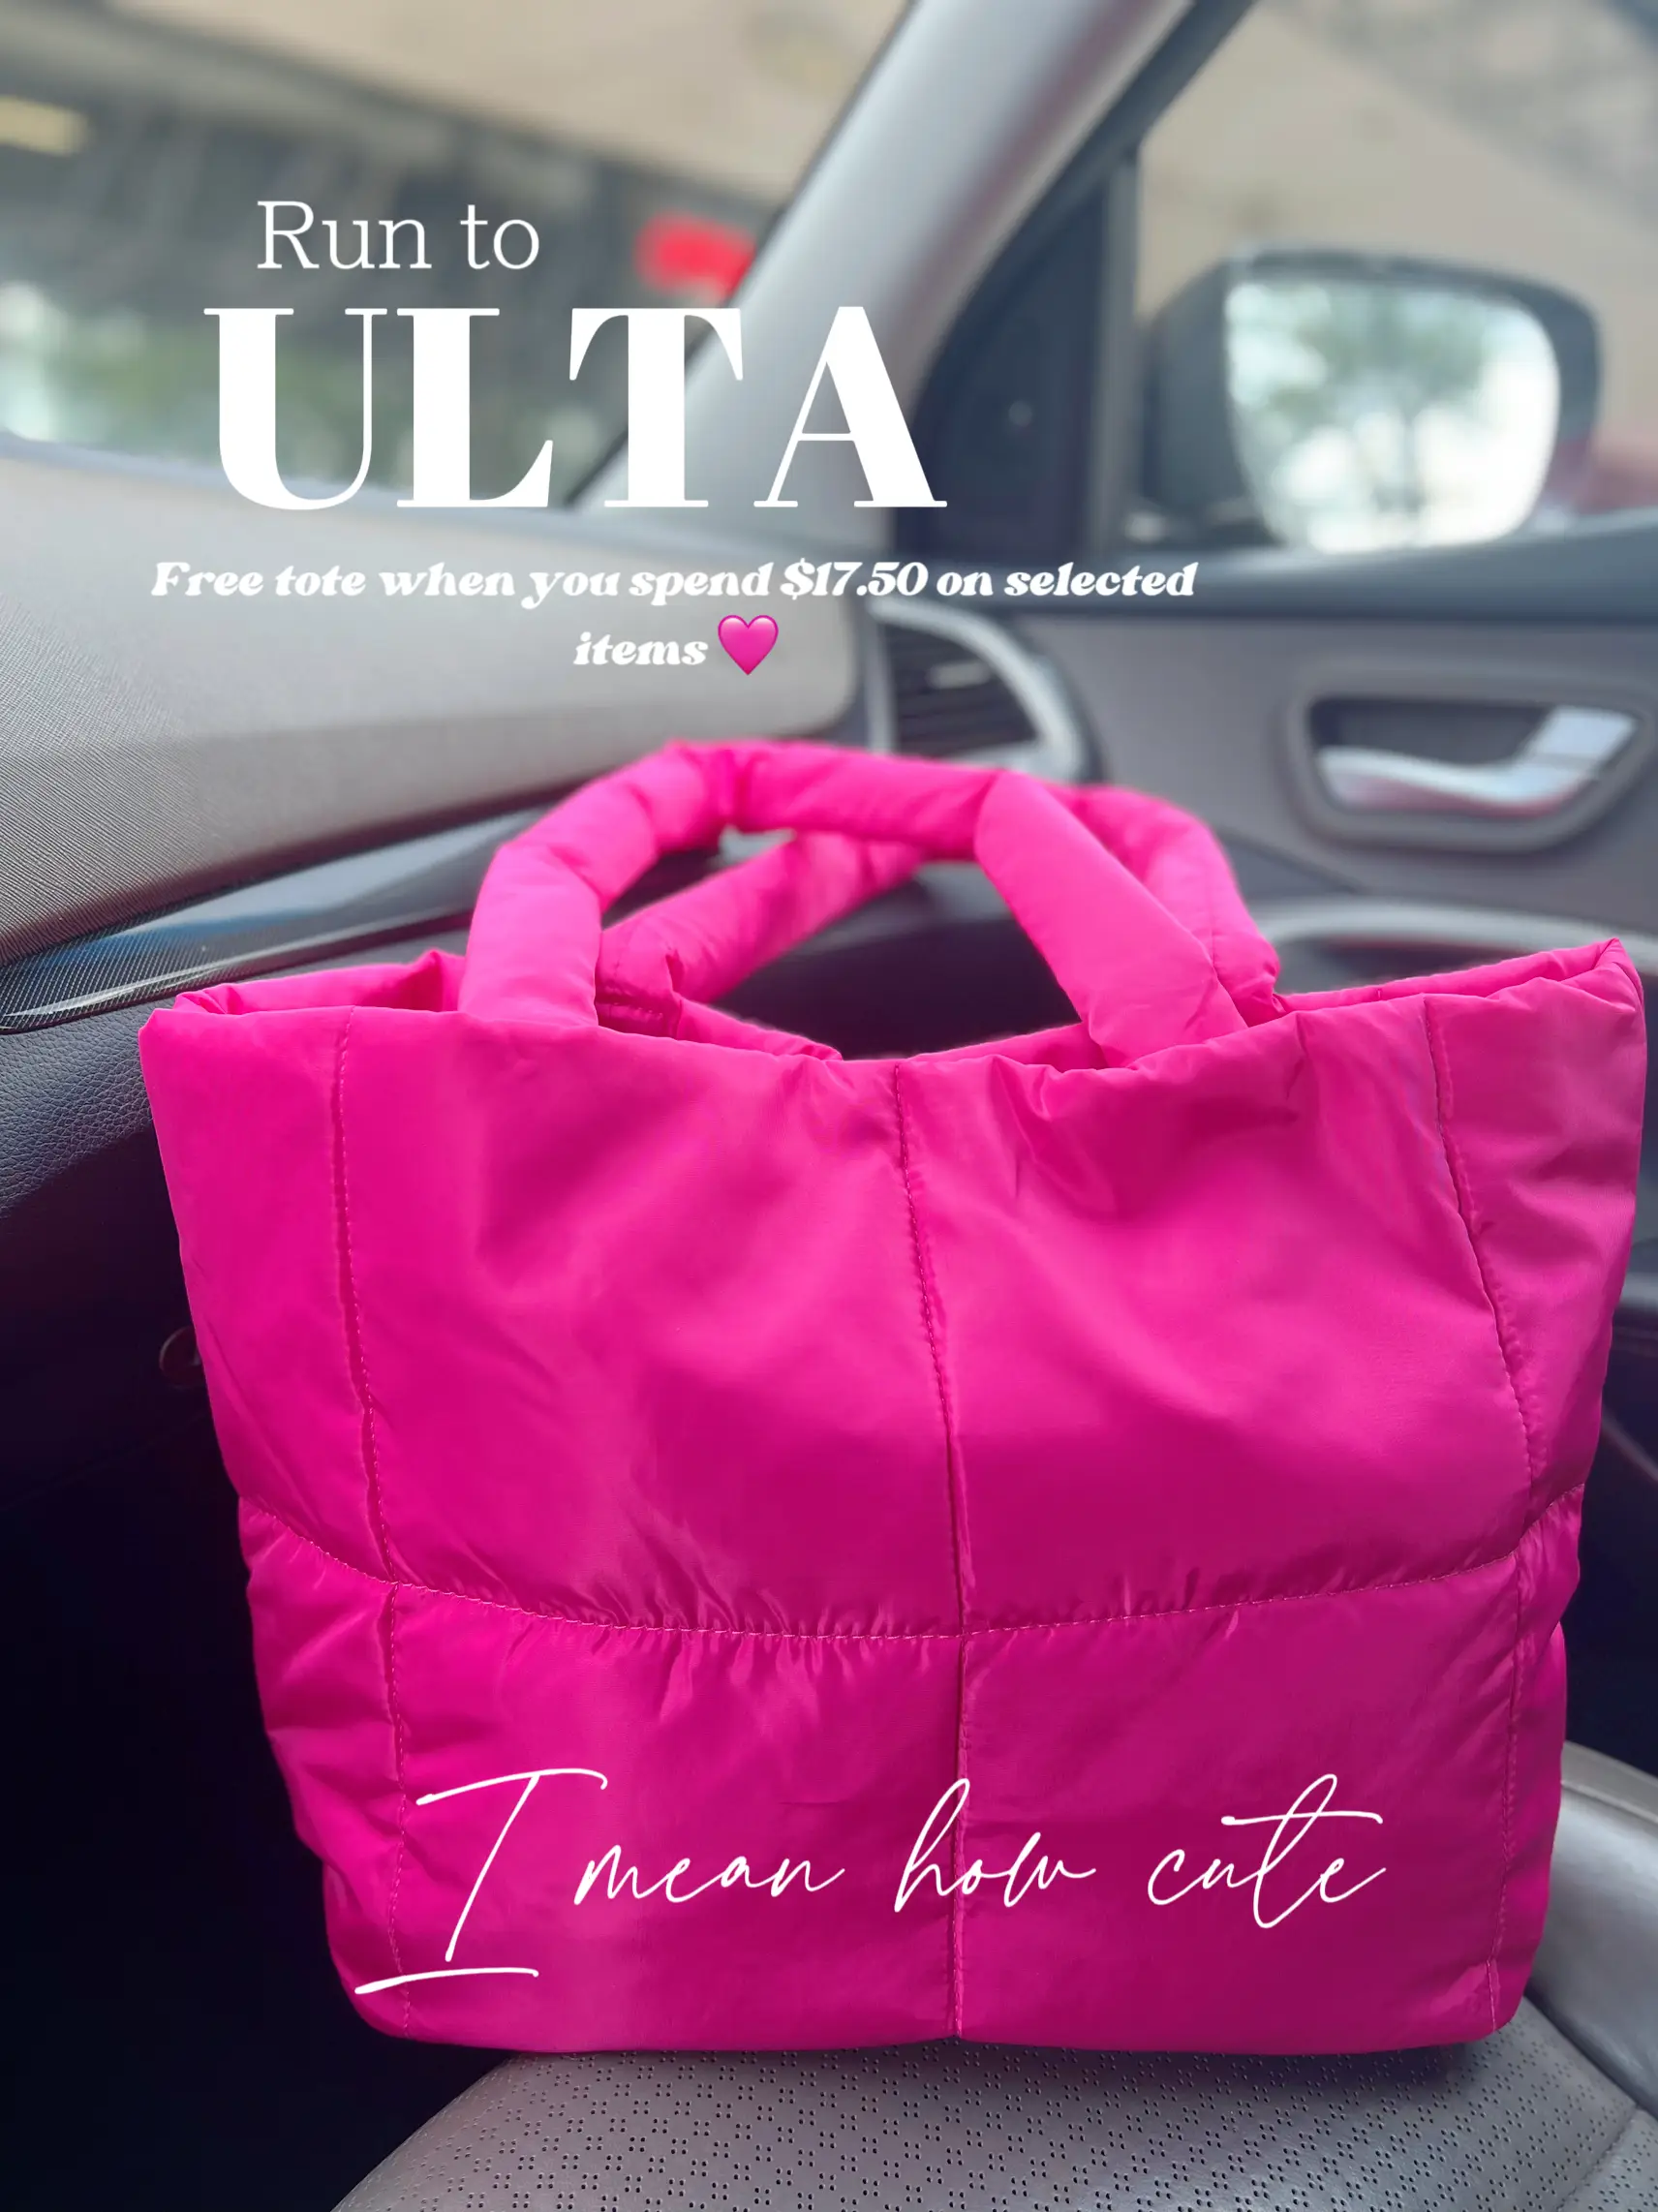 Shu Uemura AOH USA on X: Today only, receive our complimentary Murakami  tote bag + free shipping with any $60 purchase! Enter code BESTOF17 at  checkout. #shuartofhair Shop Now:  Locate a